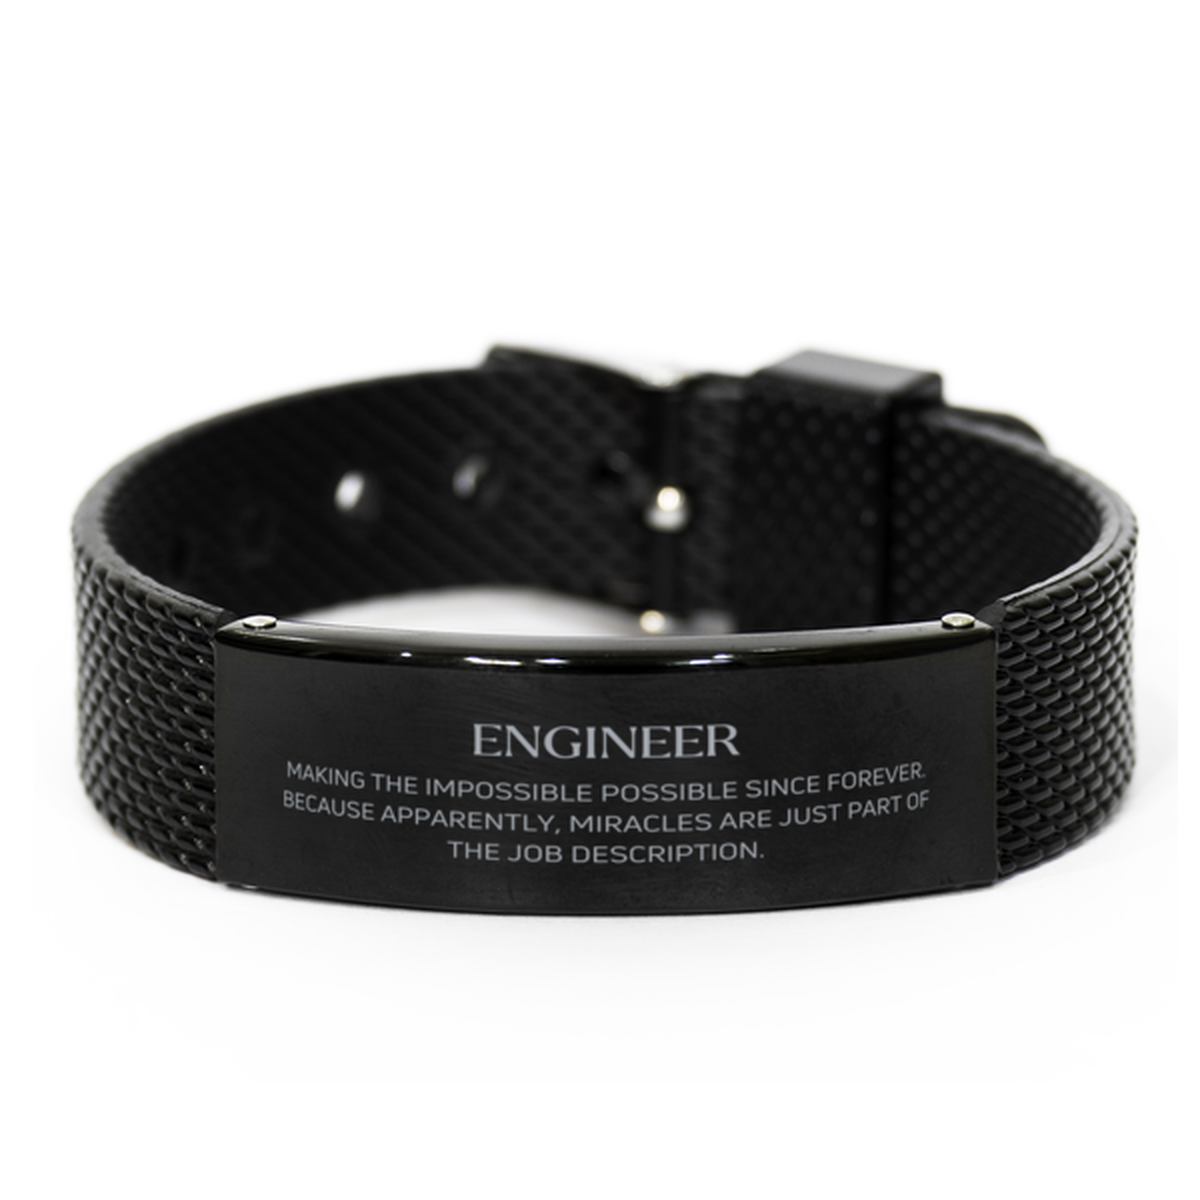 Funny Engineer Gifts, Miracles are just part of the job description, Inspirational Birthday Black Shark Mesh Bracelet For Engineer, Men, Women, Coworkers, Friends, Boss